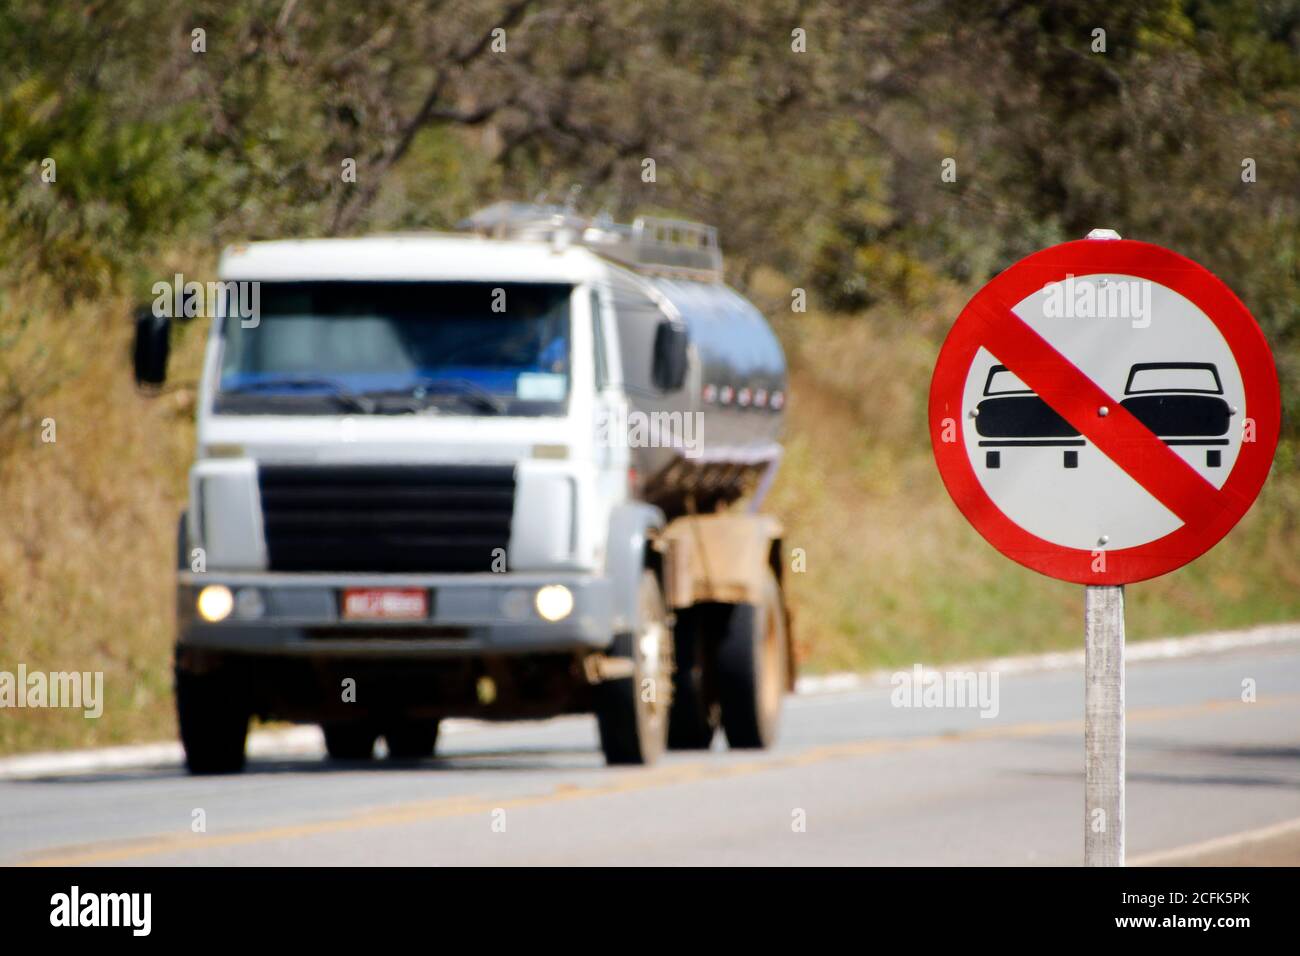 Minas Gerais / Brazil - 2019-06-23: road tanker and road sign indicating prohibited overtaking area Stock Photo